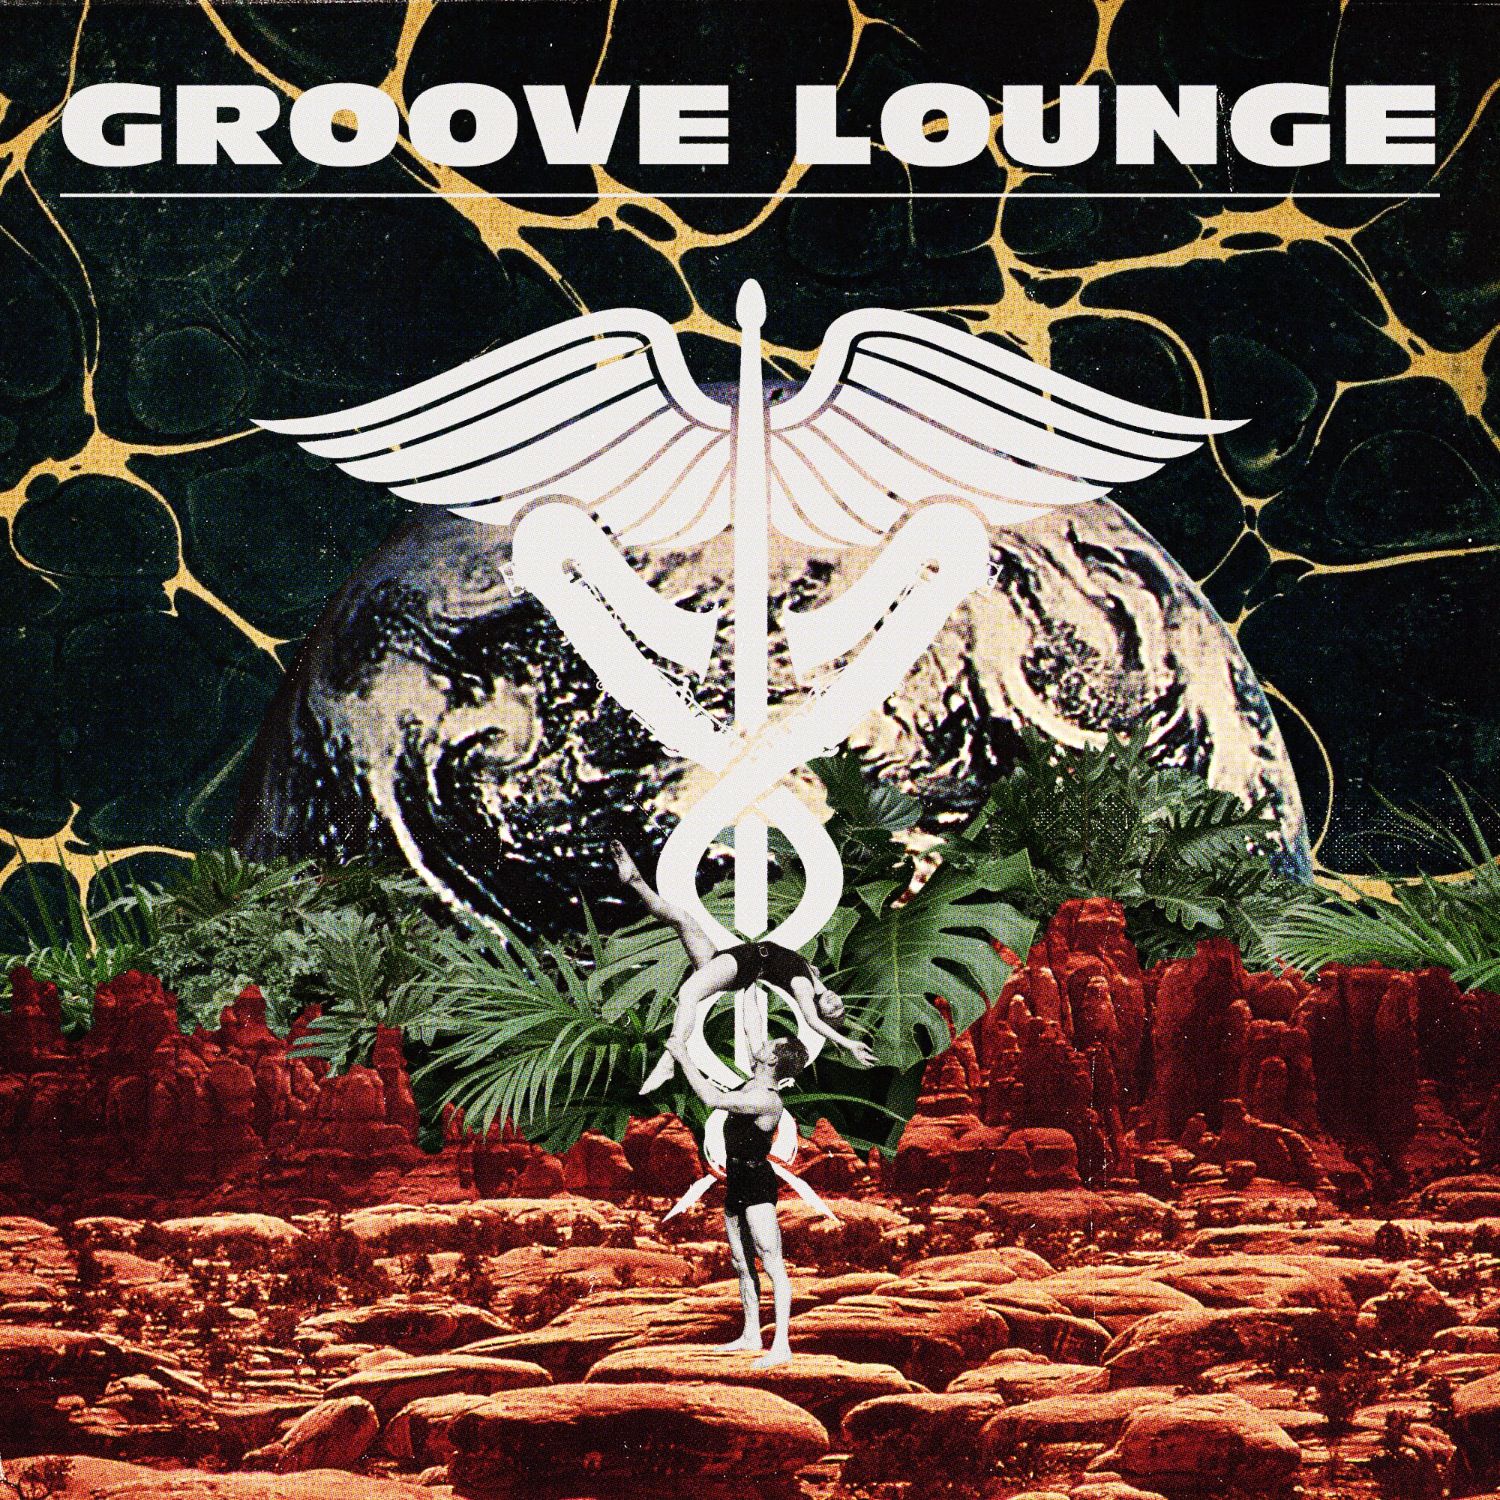 Featured image for “Groove Lounge”